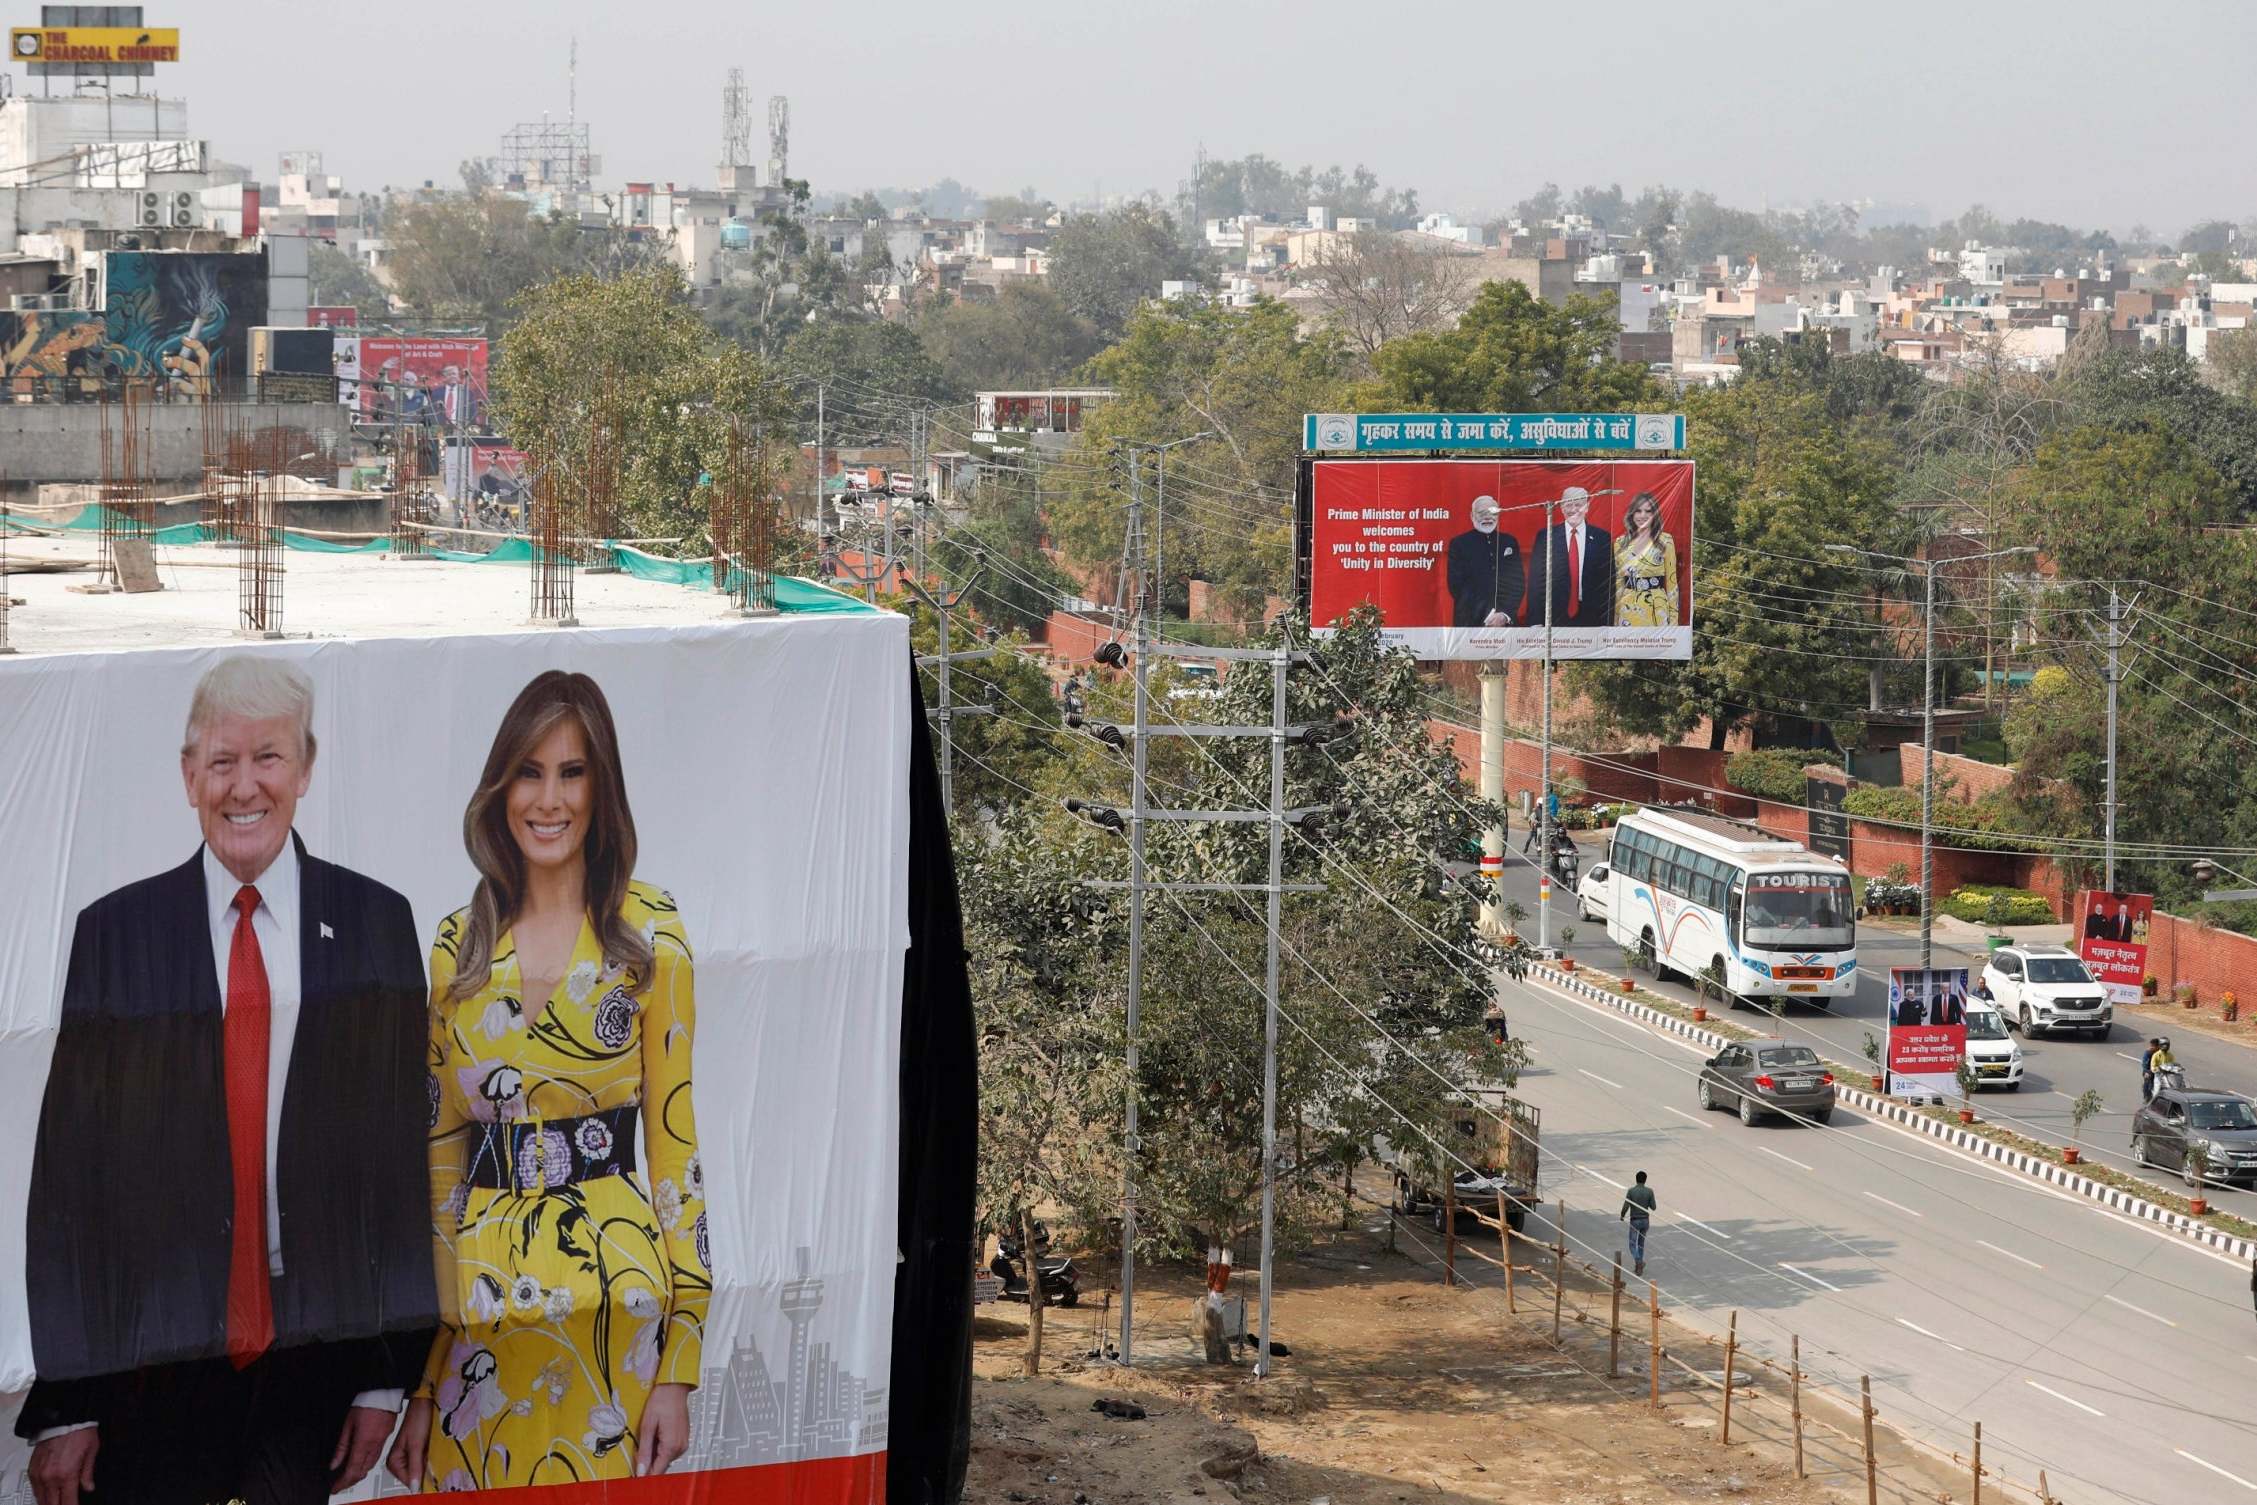 A billboard featuring President Trump and first lady Melania Trump erected to welcome them ahead of their visit to the Taj Mahal